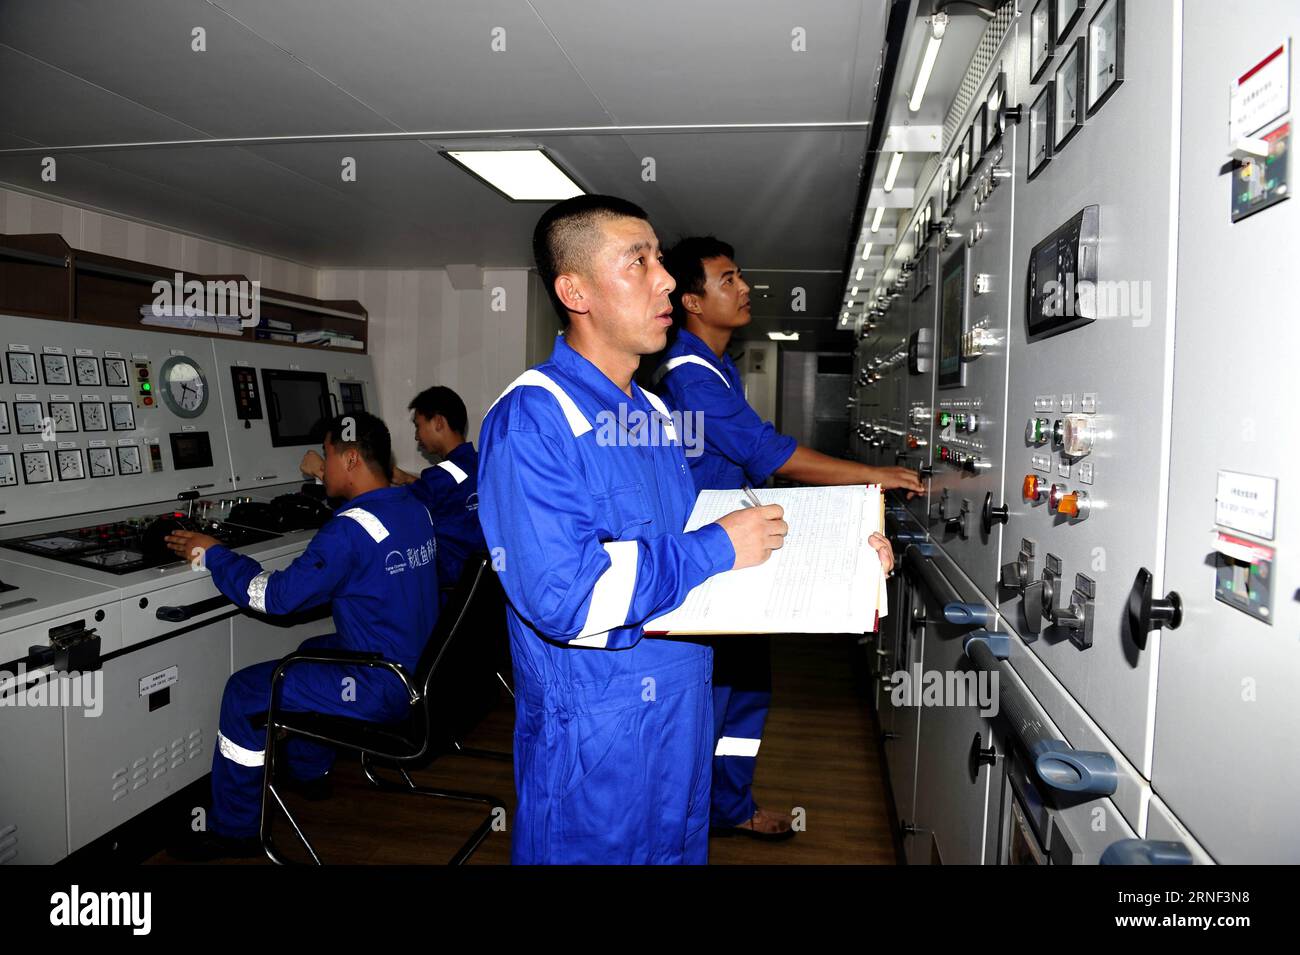 ZHANG JIAN SHIP, July 15, 2016 -- Liu Dongsheng (front), staff member of the Zhang Jian , a Chinese deep-sea explorer ship, stays on duty at the engine control room on the ship, July 15, 2016. The ship, 97 meters long and 17.8 meters wide, set sail on July 12 from Shanghai to the South Pacific for scientific research. It s the mother ship of the 11,000-meter Rainbow Fish submersible, which Chinese researchers are preparing to send to the Mariana Trench late this year or early next year. ) (mp) CHINA-EXPLORER SHIP-LIFE (CN) ZhangxJiansong PUBLICATIONxNOTxINxCHN   Zhang Jian Ship July 15 2016 Li Stock Photo